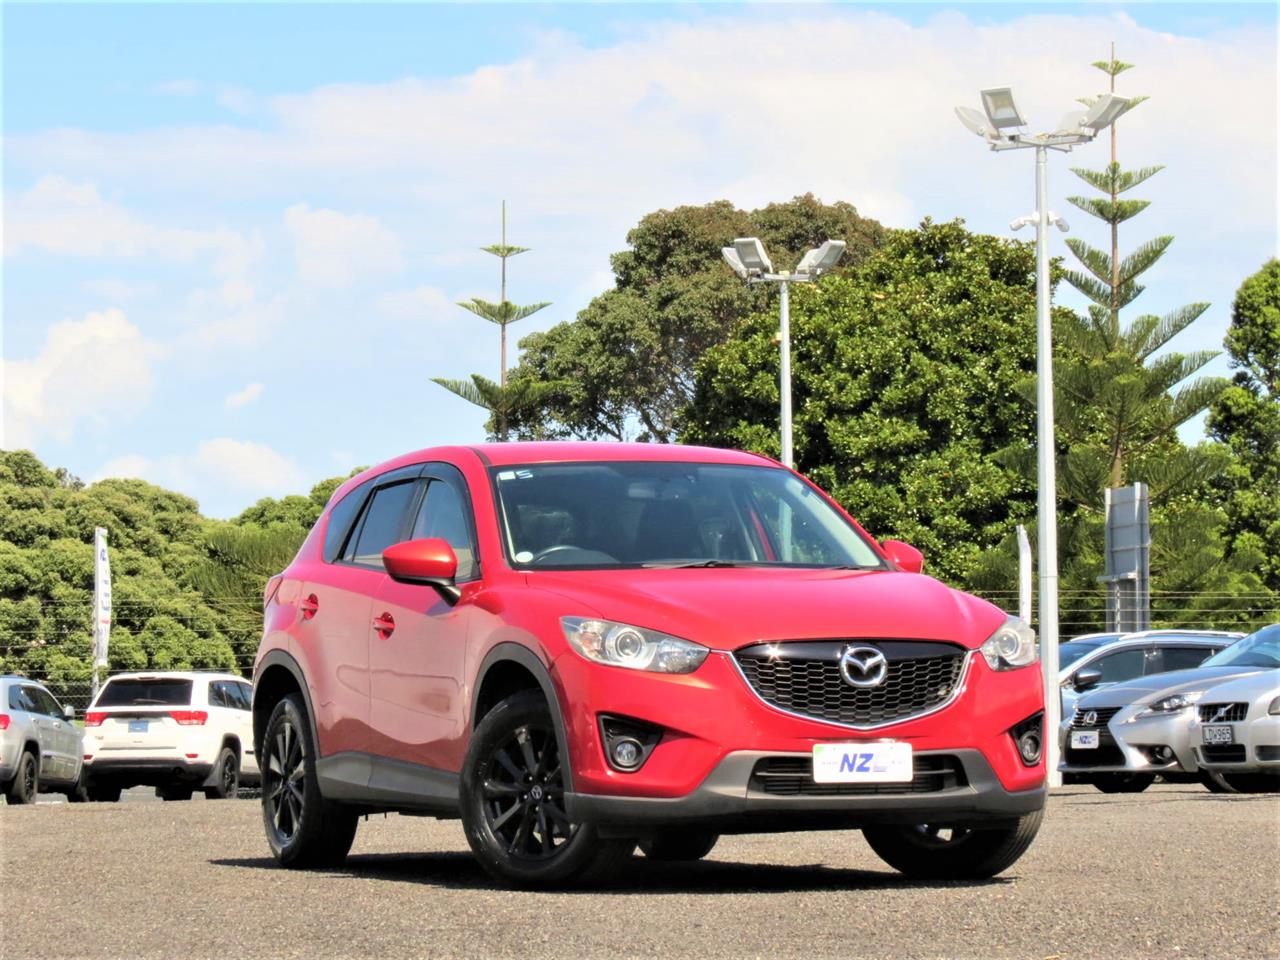 NZC 2012 Mazda CX-5 just arrived to Auckland